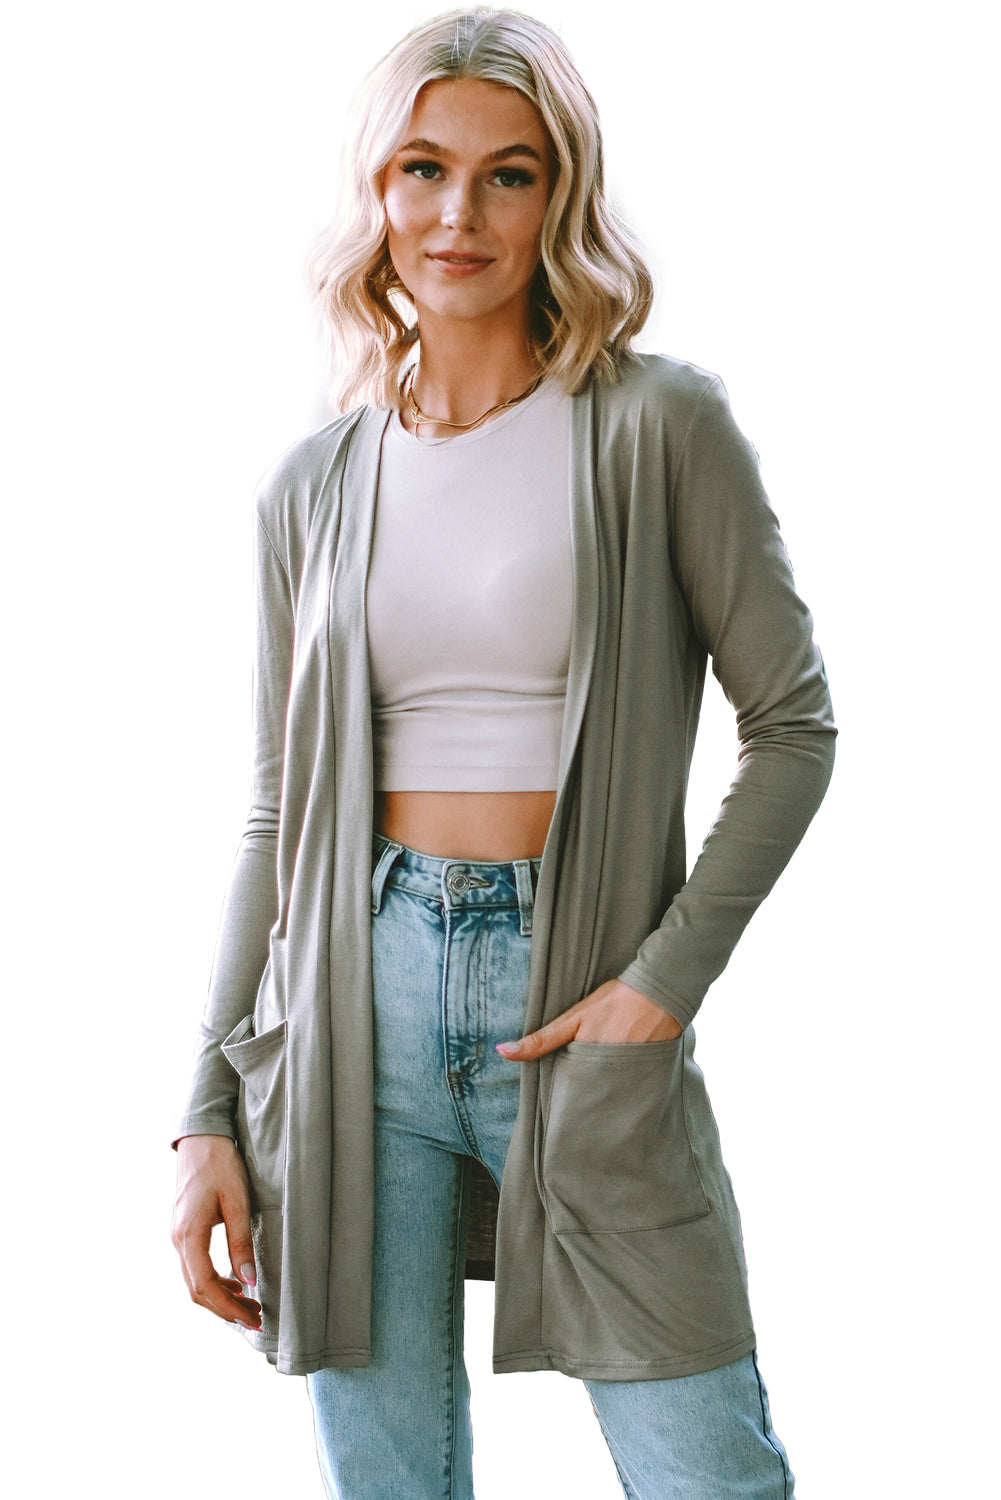 Sage Green Solid Color Slouchy Pockets Tunic Cardigan